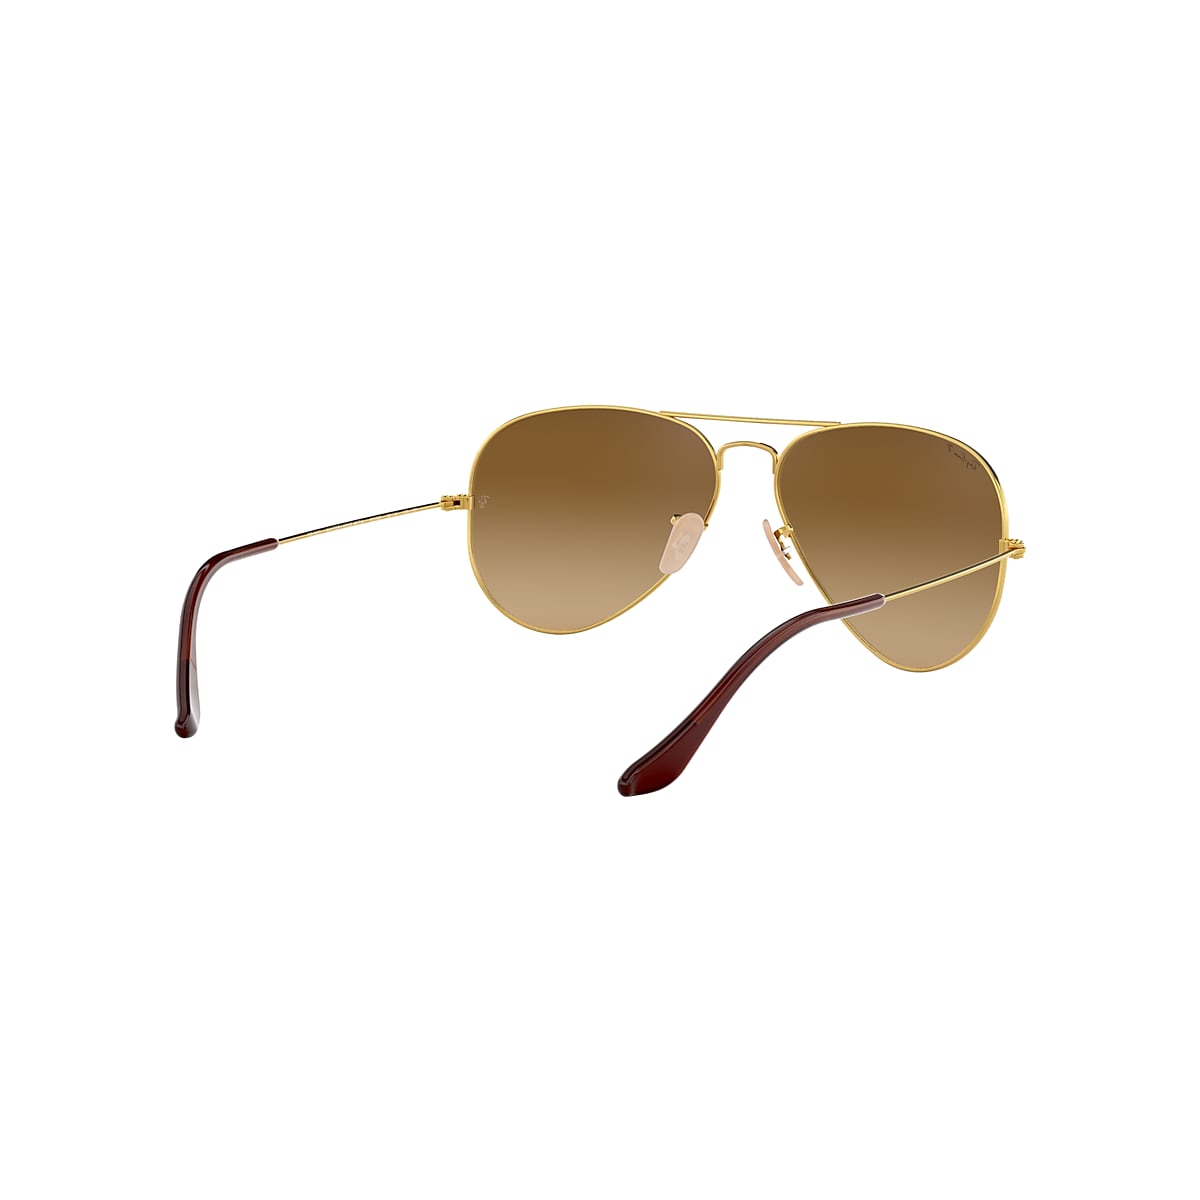 Sunglasses Ray-Ban AVIATOR 58mm RB3025 001/51 Gold Gradient Brown Clea –  Shade Review Store